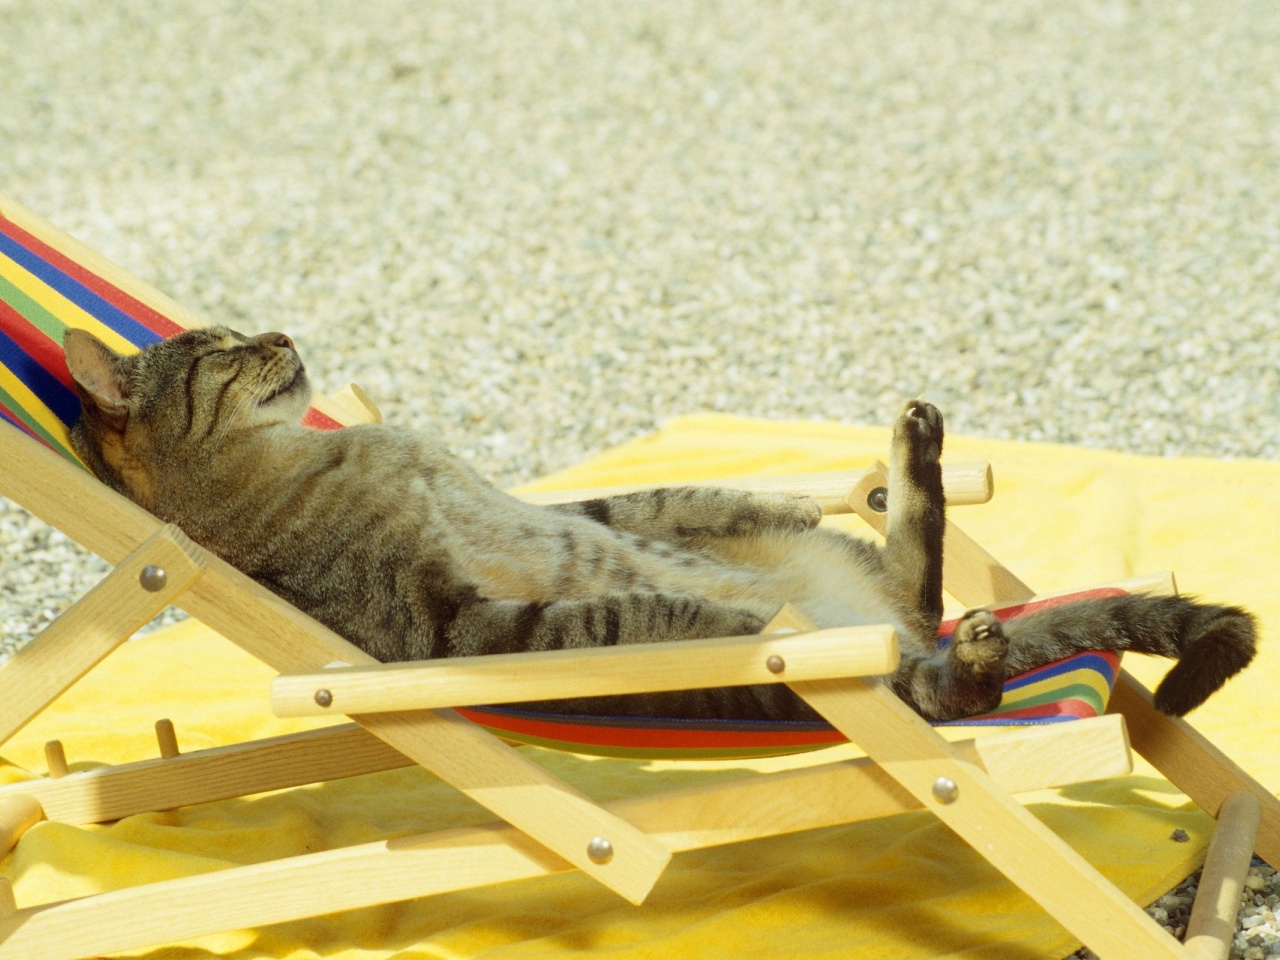 Cat Relaxing On Lounge Chair